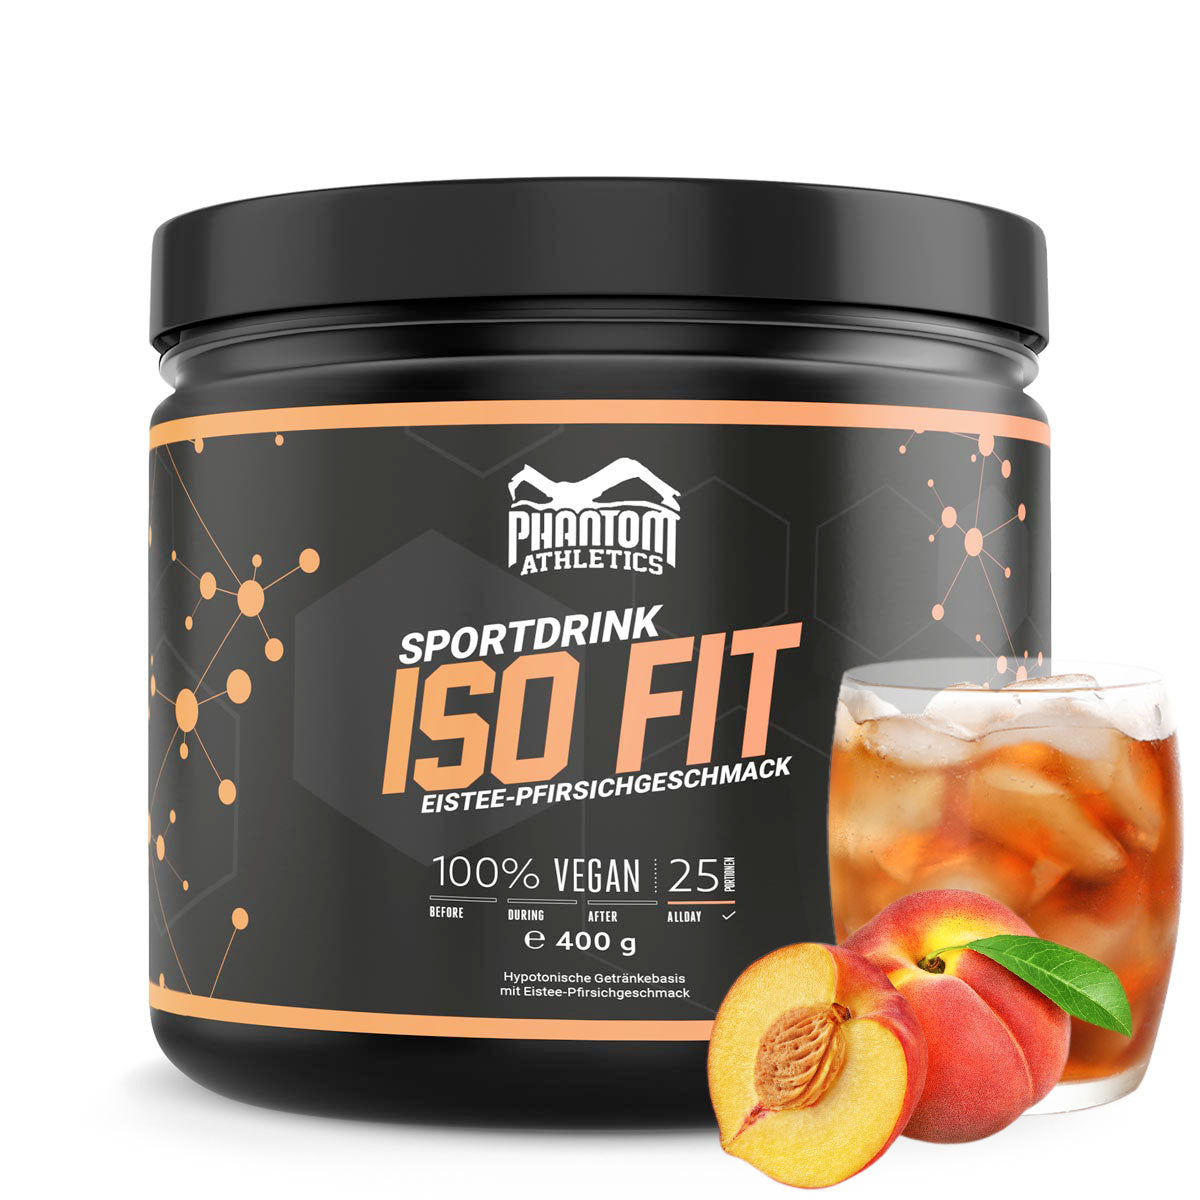 The Phantom ISO FIT nutritional supplement provides you with everything you need for martial arts training. Now with a delicious iced tea peach flavor.